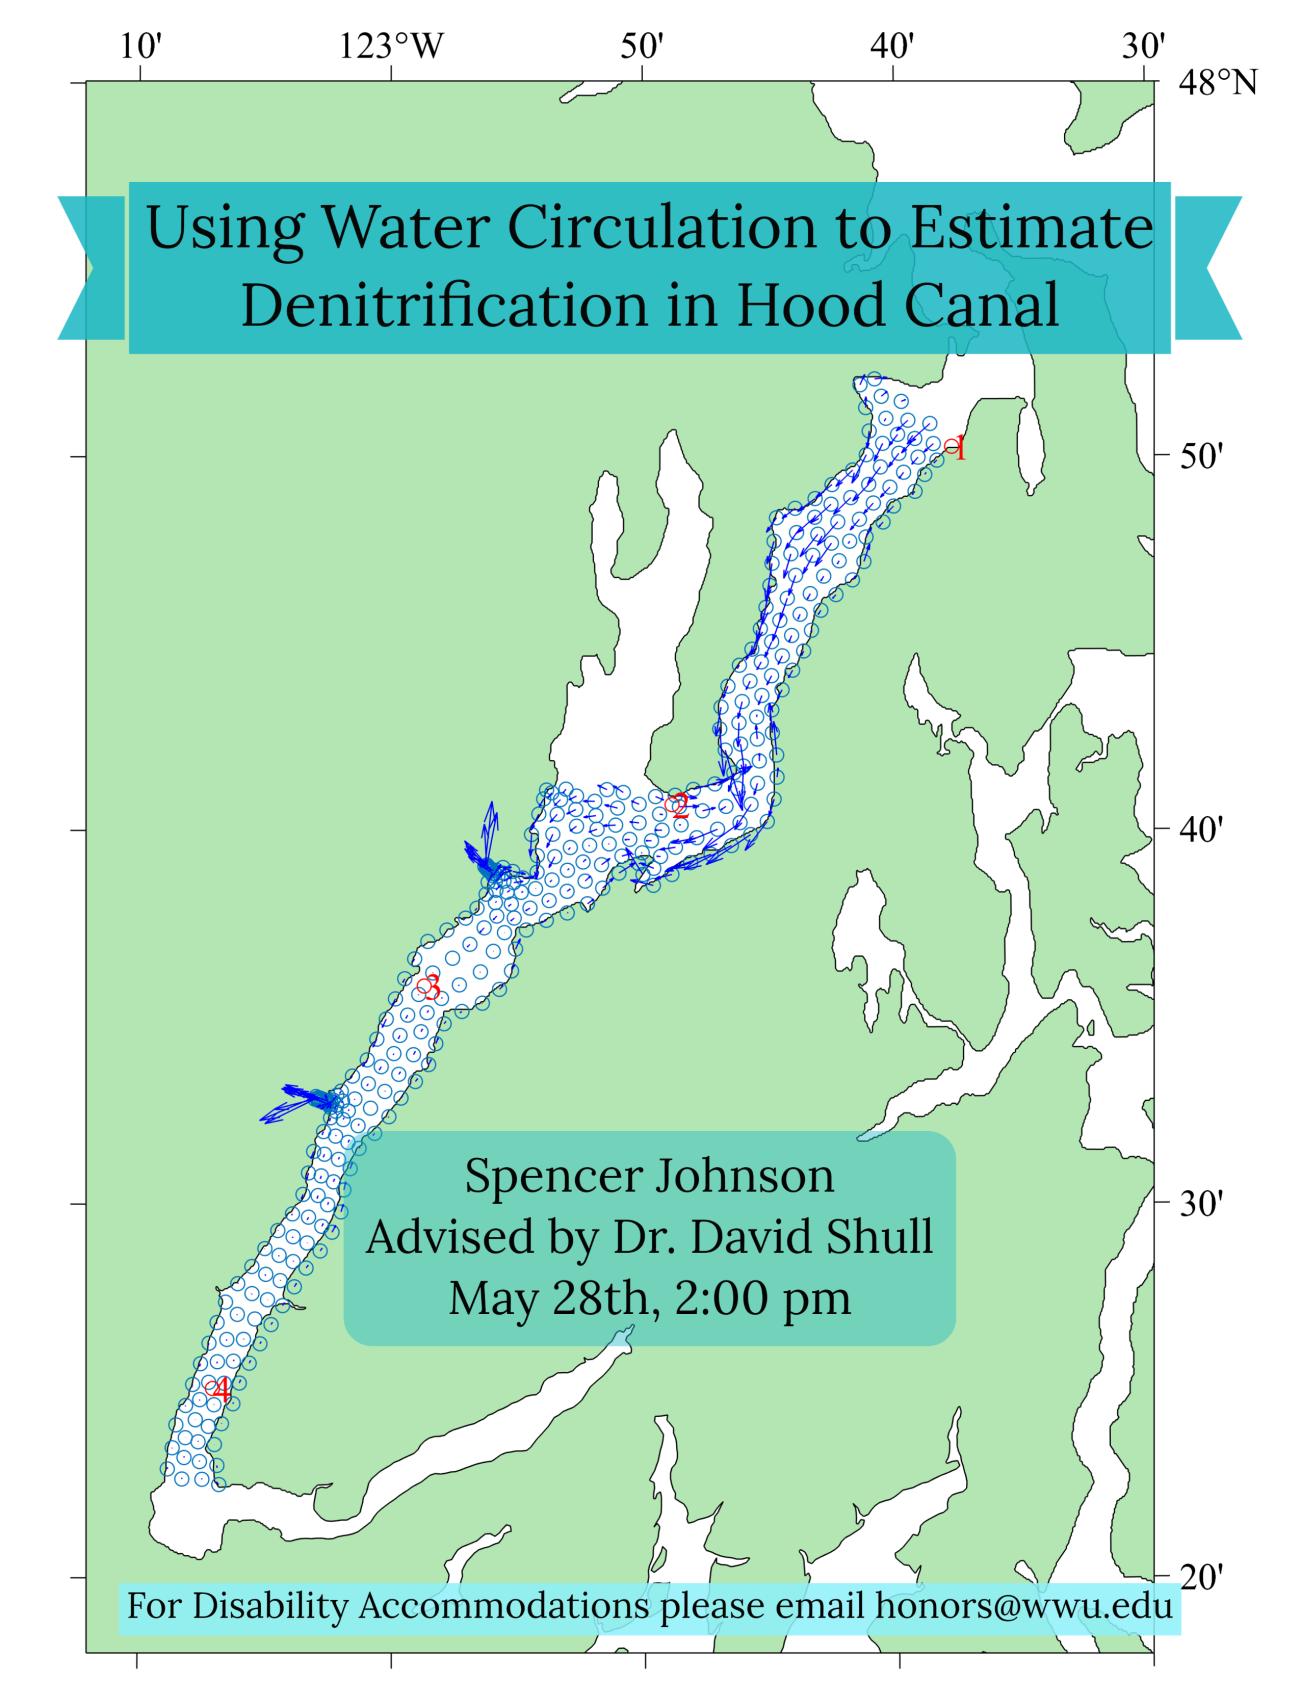 Map of Hood Canal with points spread throughout the main channel and vectors showing current strengths. Text reads: "Using Water Circulation to Estimate Denitrification in Hood Canal. Spencer Johnson, Advised by Dr. David Shull. May 28th, 2:00 pm. For disability accommodations please email honors@wwu.edu". 